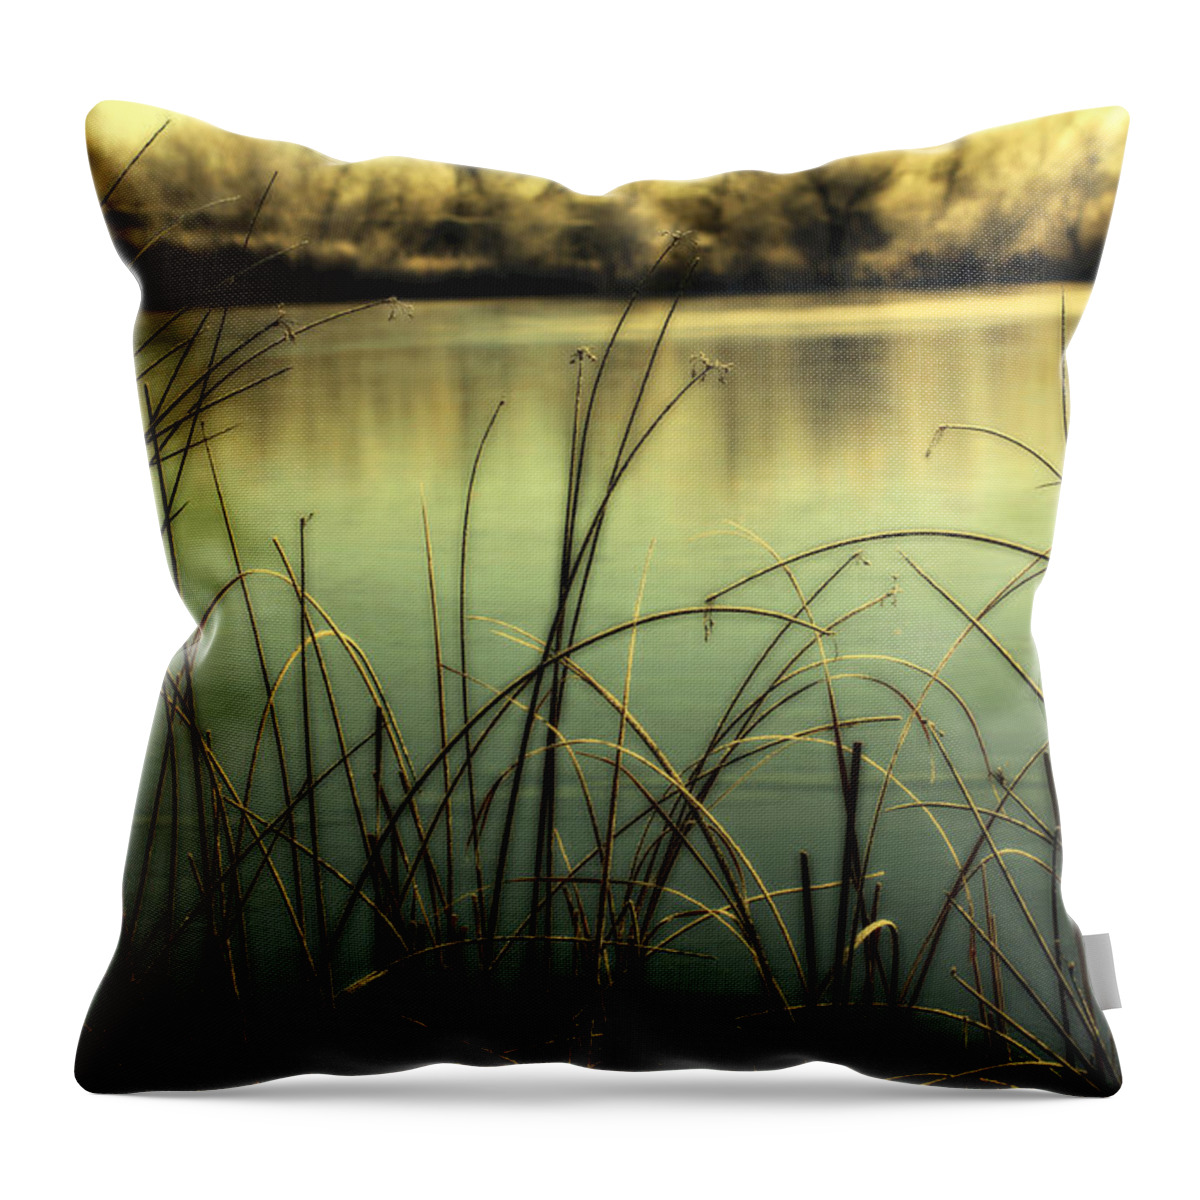 Hoar Frost Throw Pillow featuring the photograph Early Morning Duck Hunting by Marilyn Hunt